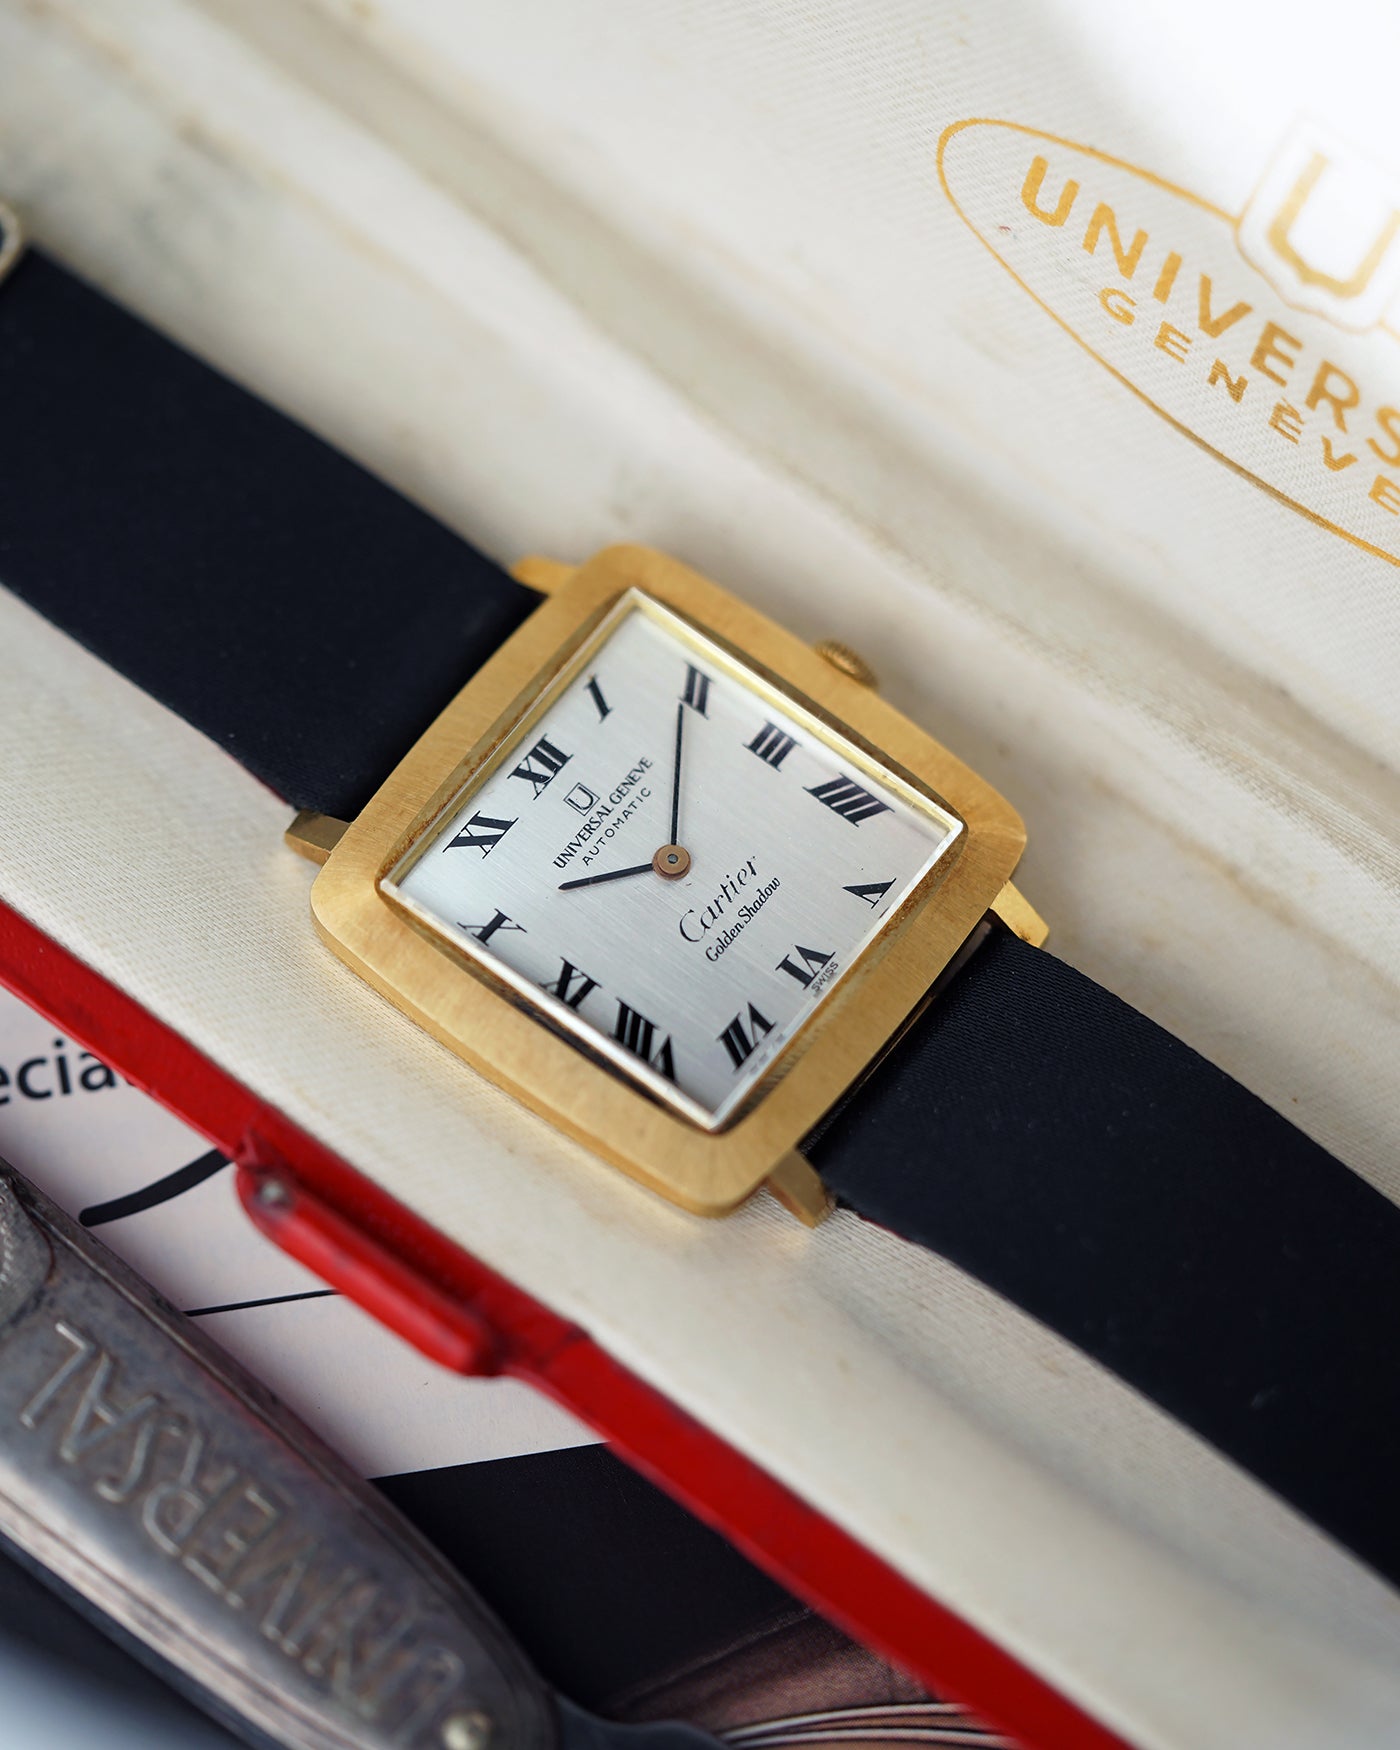 *NOS* 1966 Universal Genève Retailed By Cartier | Cal. 1-66 | Ref.116614/3 | 18Kt Gold | With Box, Original Strap and Signed Gold Buckle